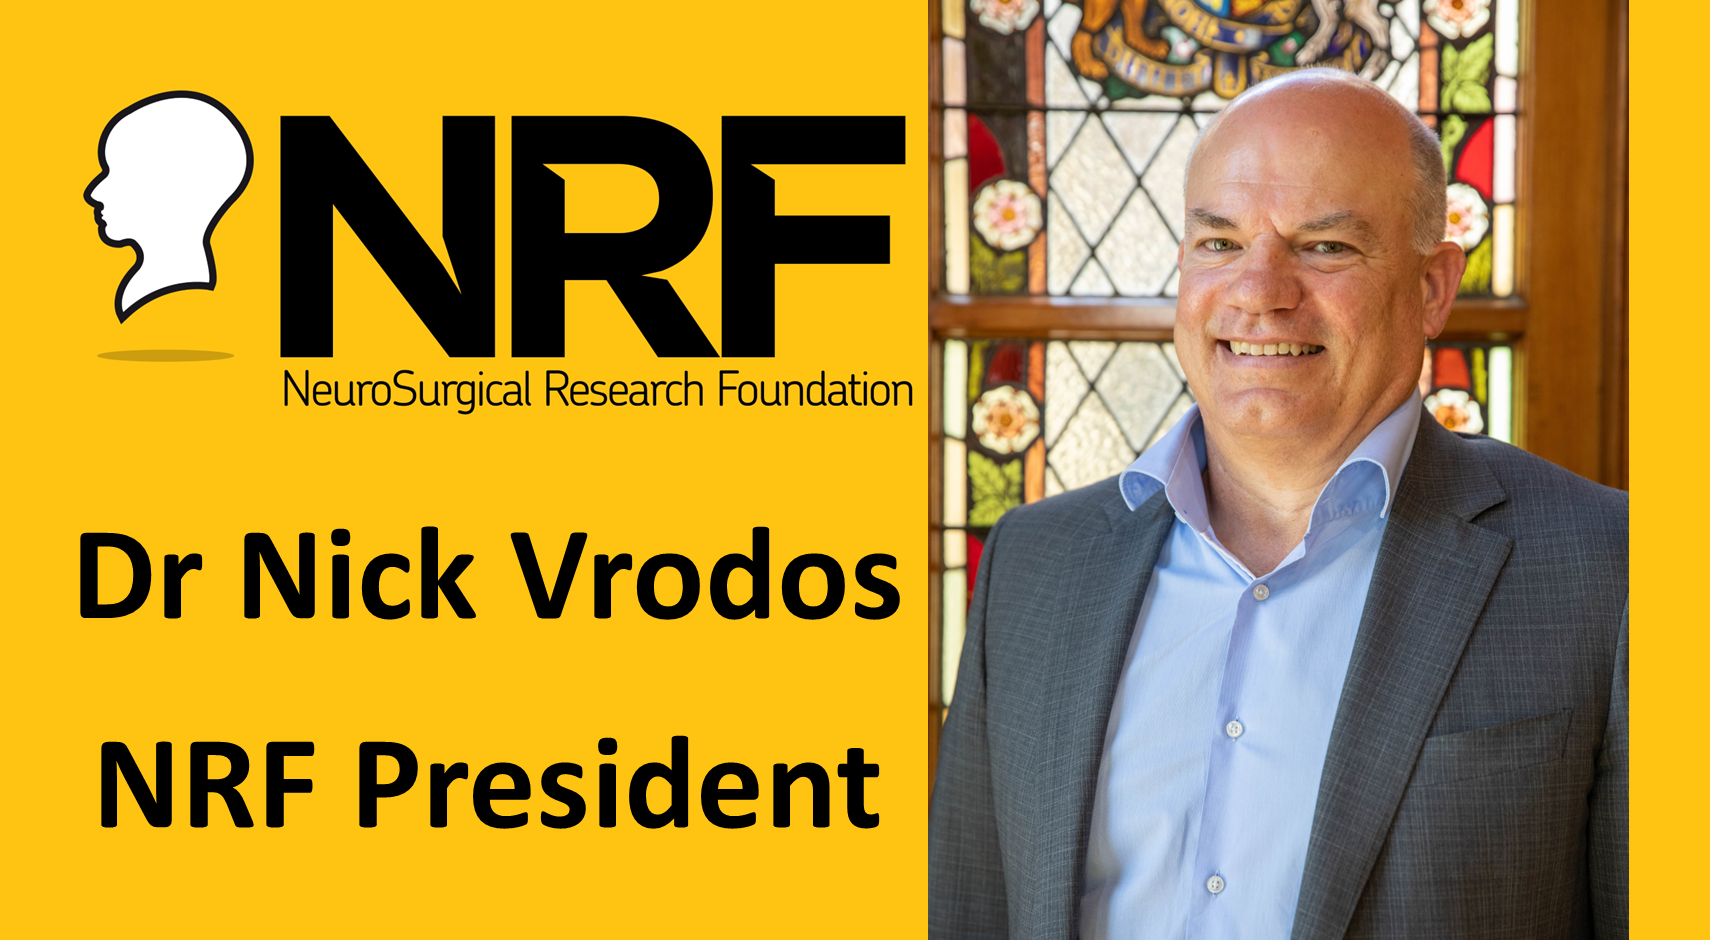 New NRF President Dr Nick Vrodos appointed image